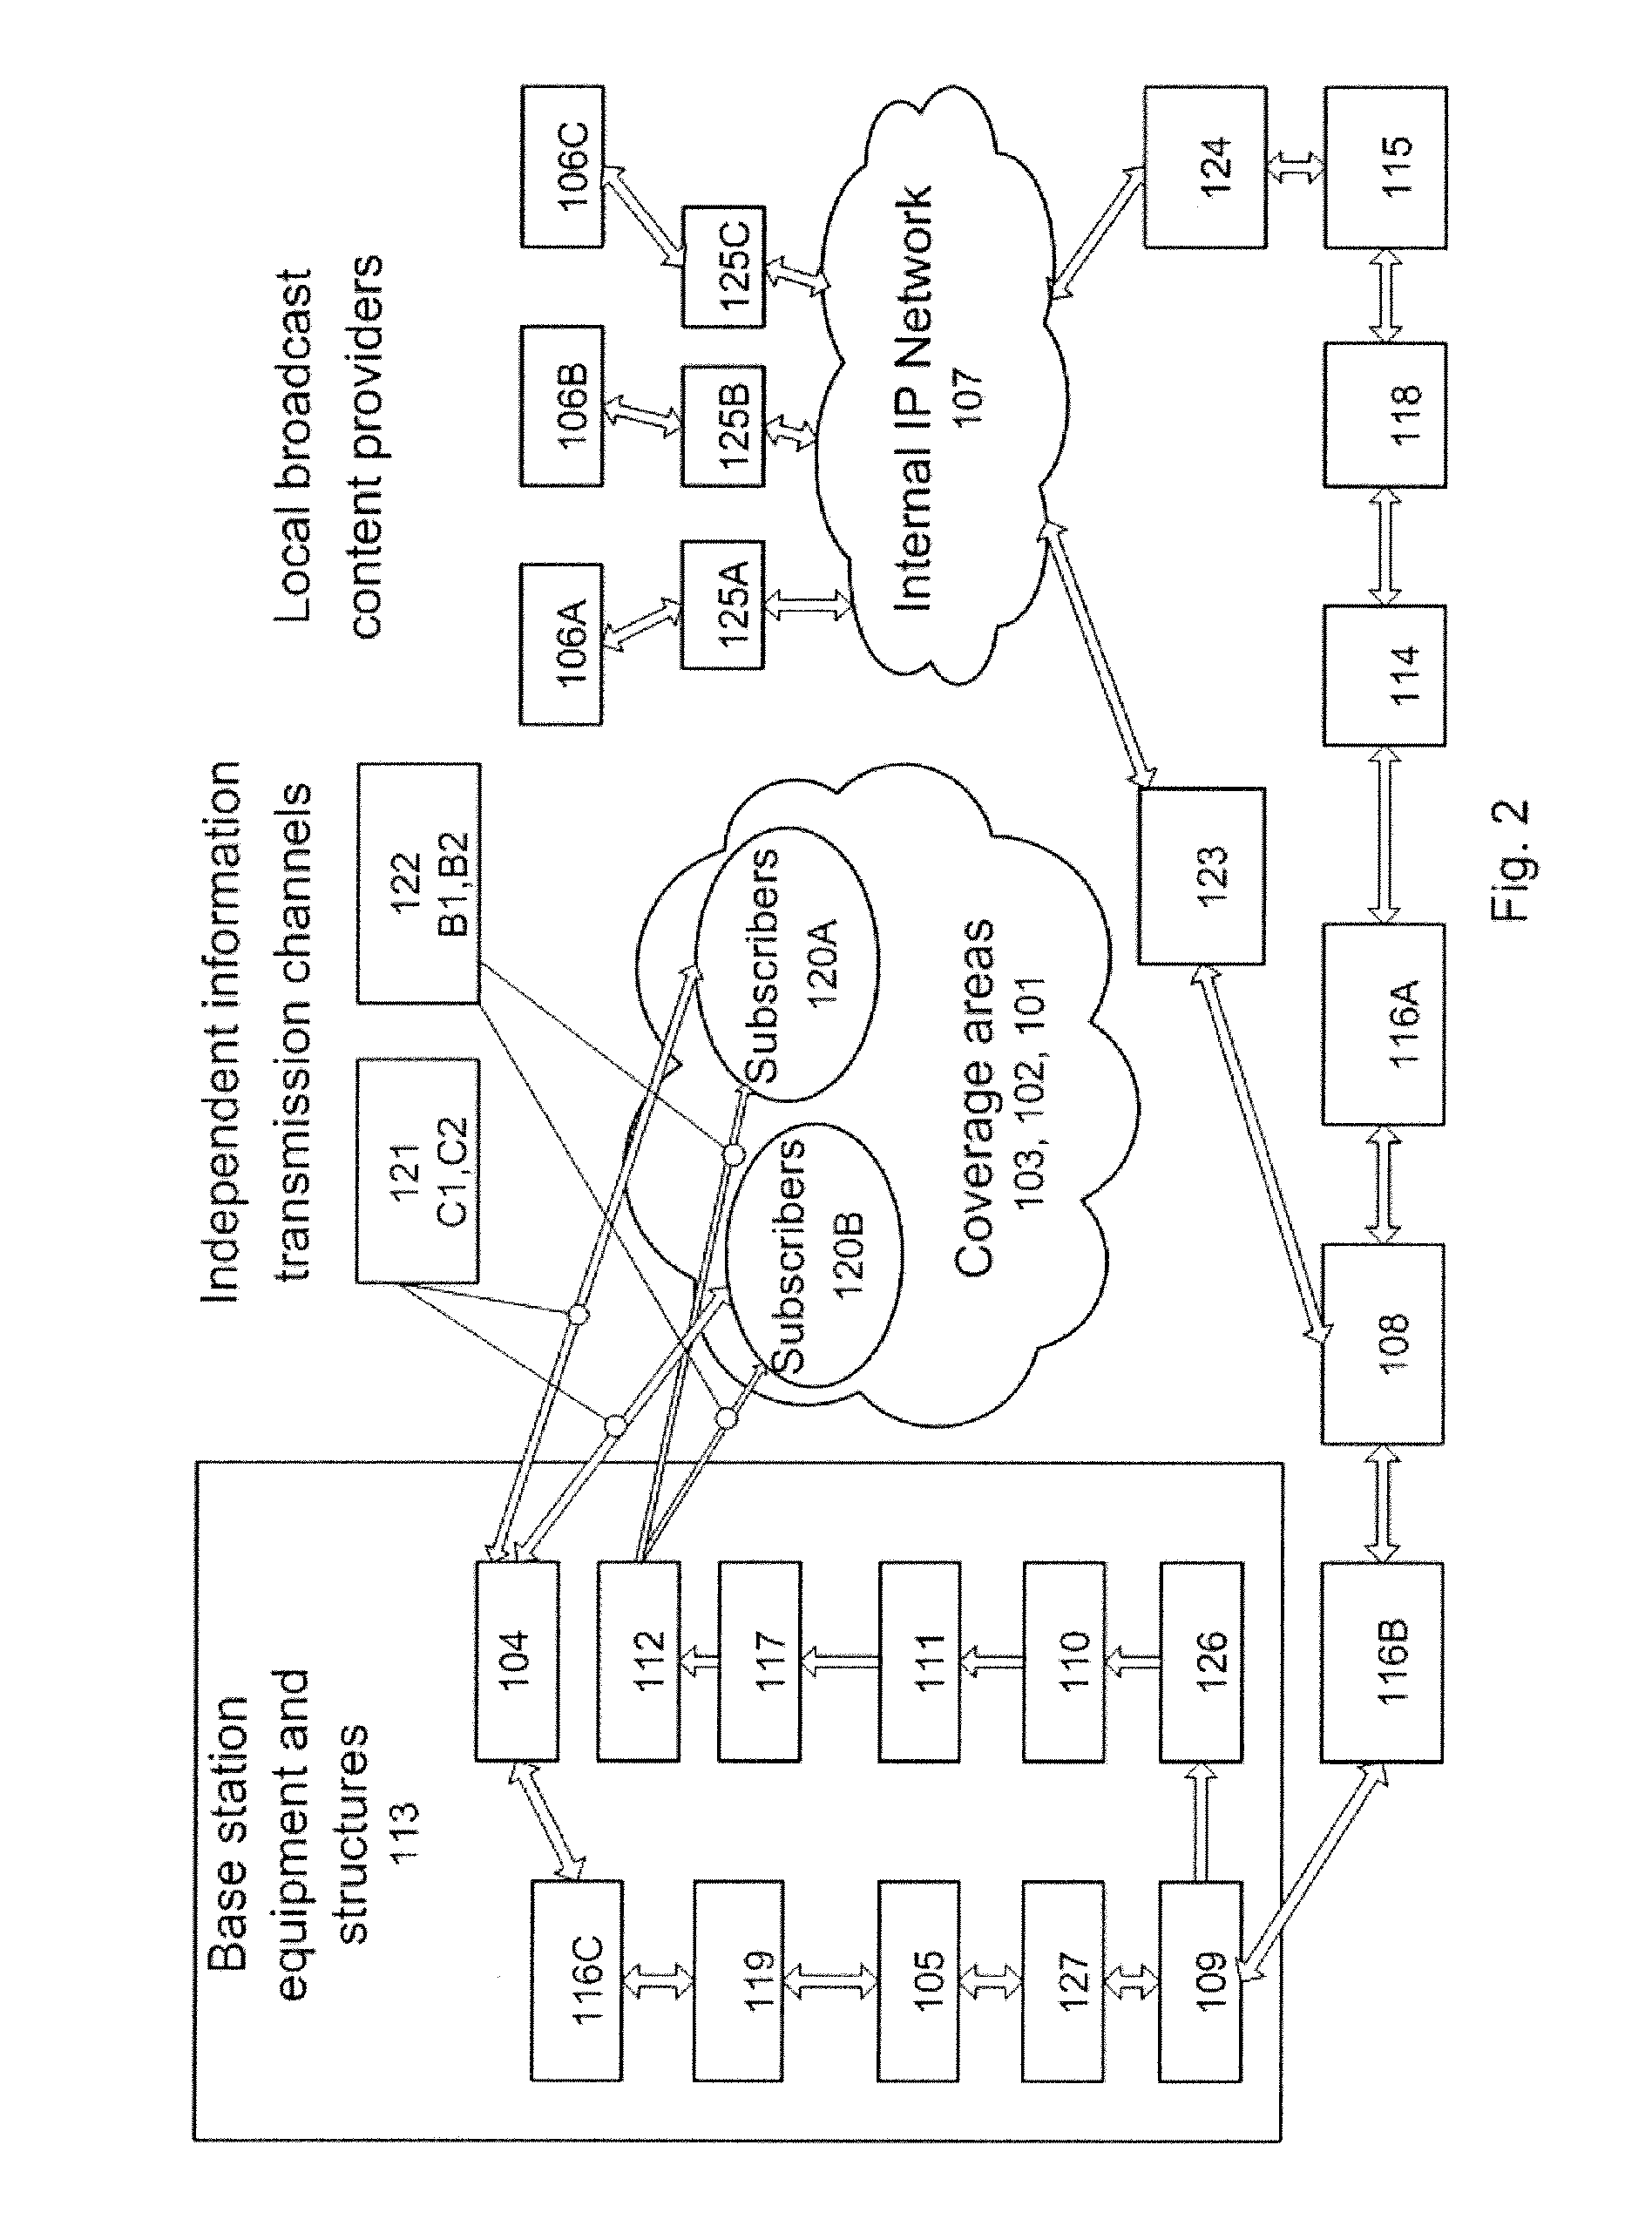 Method for Transmitting Information Over an Integrated Telecommunications and Broadcast System and Integrated Telecommunications and Broadcast System